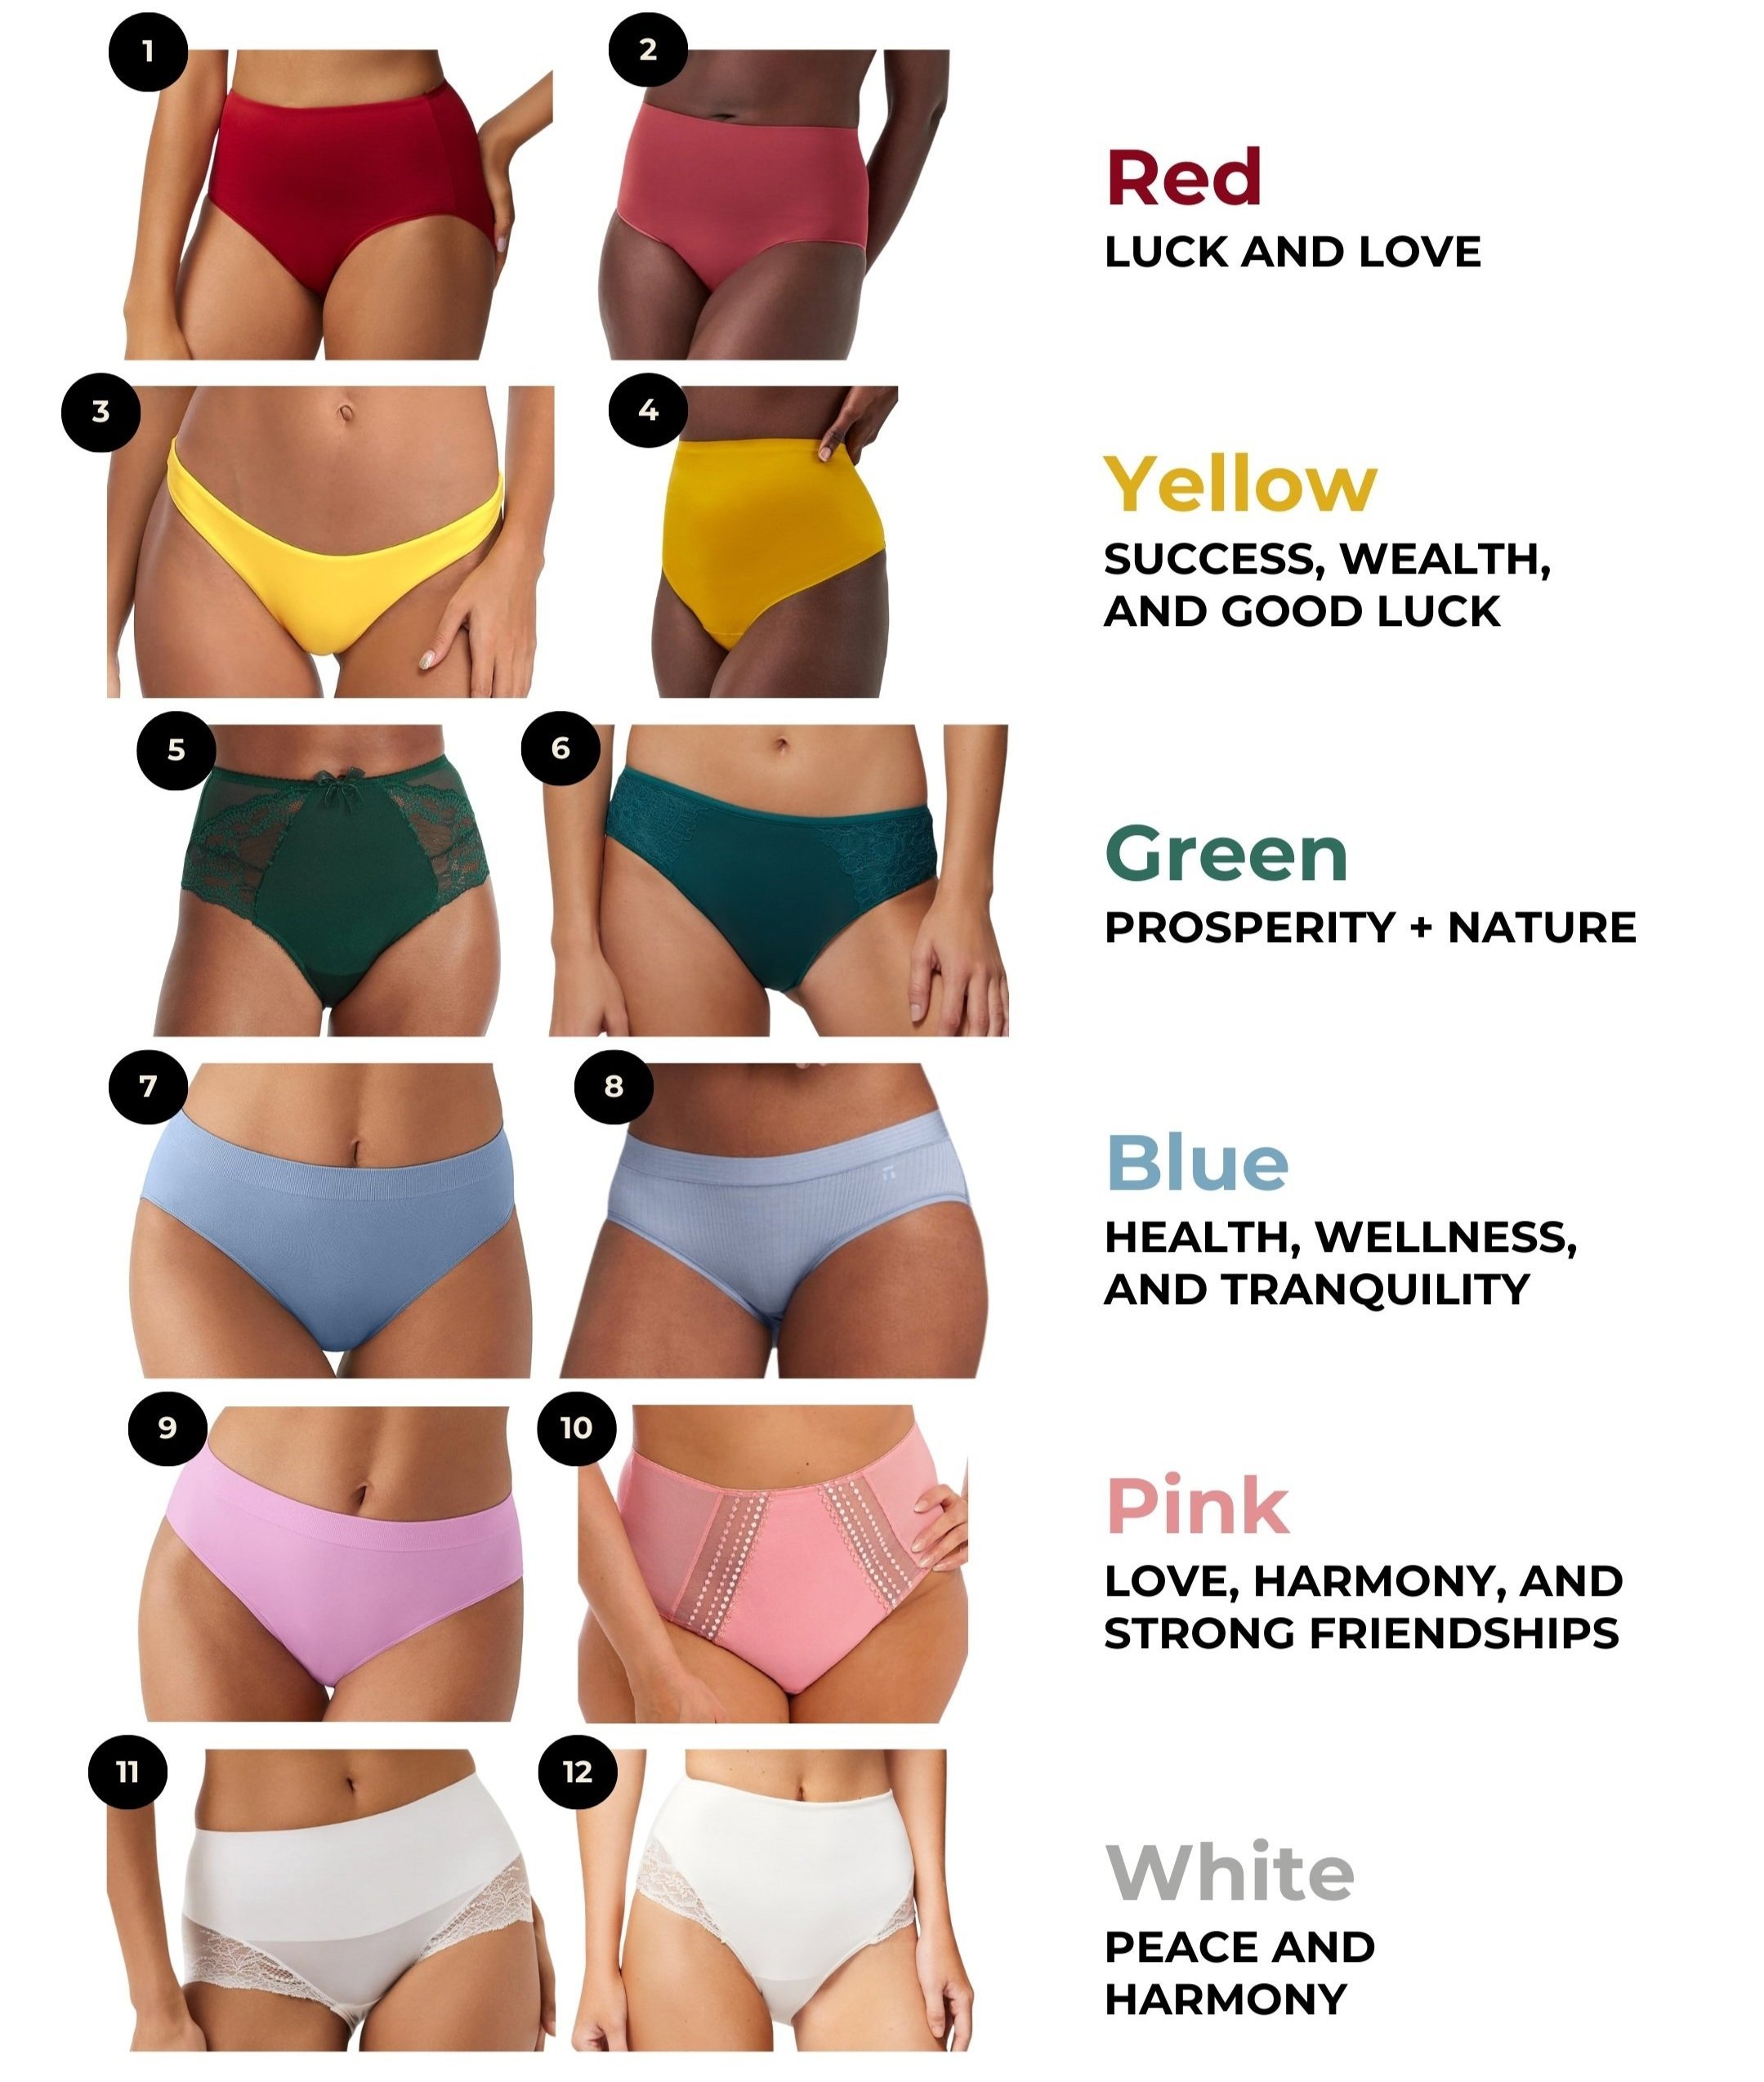 New Year's Eve Underwear Tradition: What Color Will You Wear